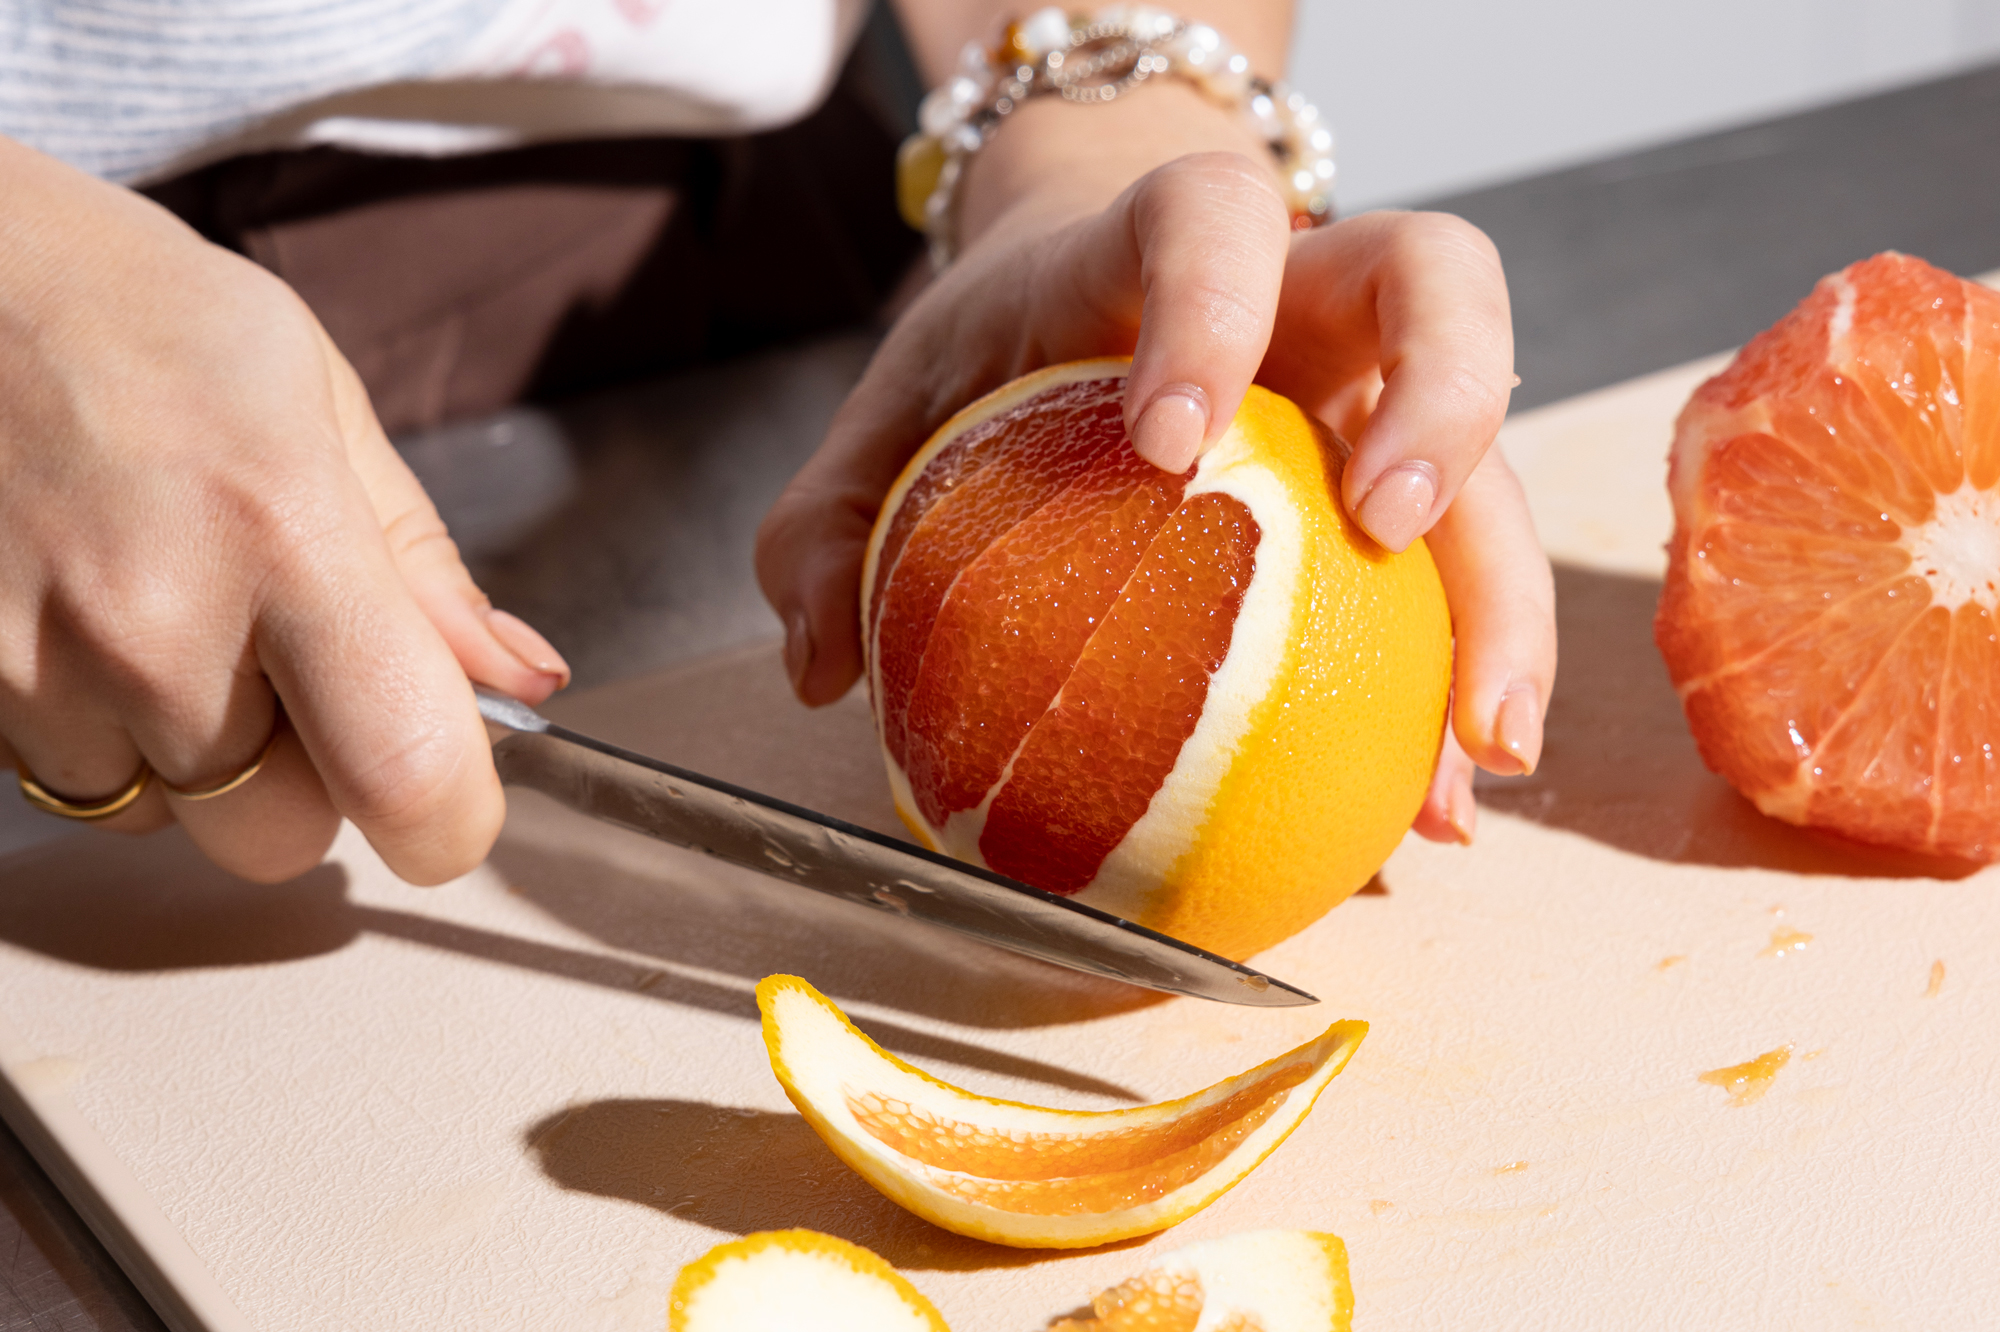 Citrus being cut, creative food photography by Freshmade.